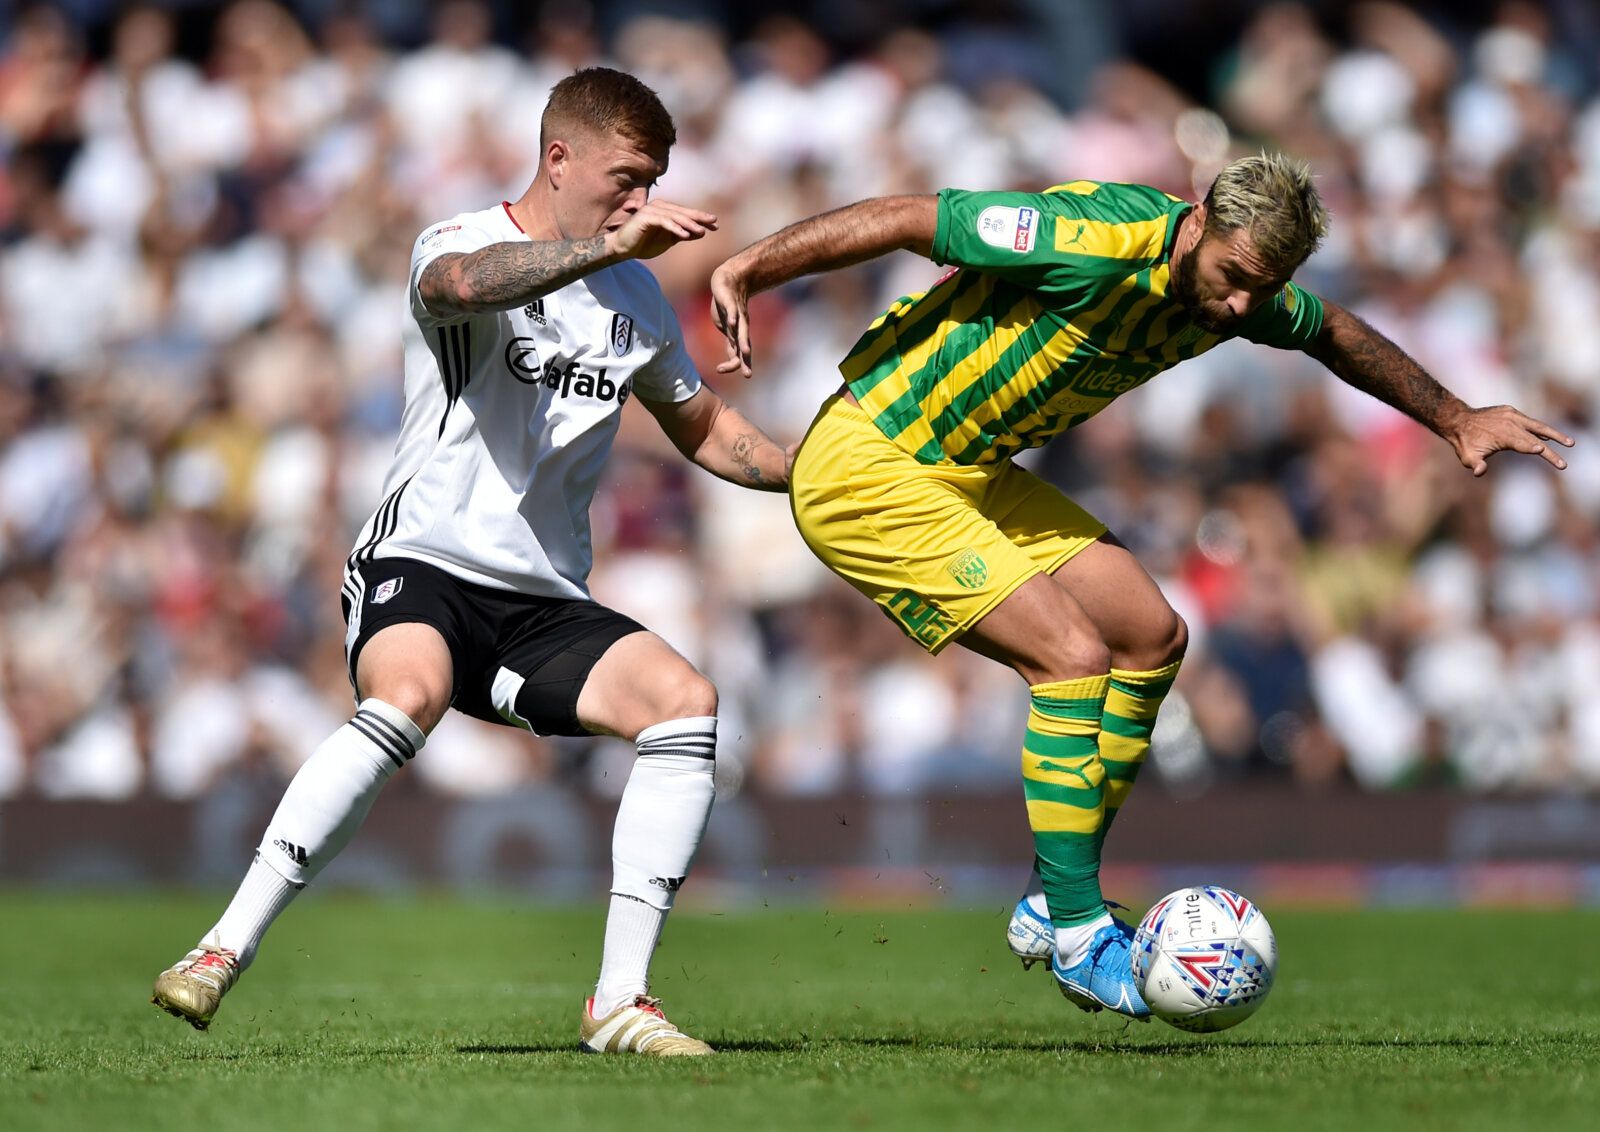 Soccer Football - Championship - Fulham v West Bromwich Albion - Craven Cottage, London, Britain - September 14, 2019  West Bromwich Albion's Charlie Austin in action with Fulham's Alfie Mawson    Action Images/Adam Holt  EDITORIAL USE ONLY. No use with unauthorized audio, video, data, fixture lists, club/league logos or 